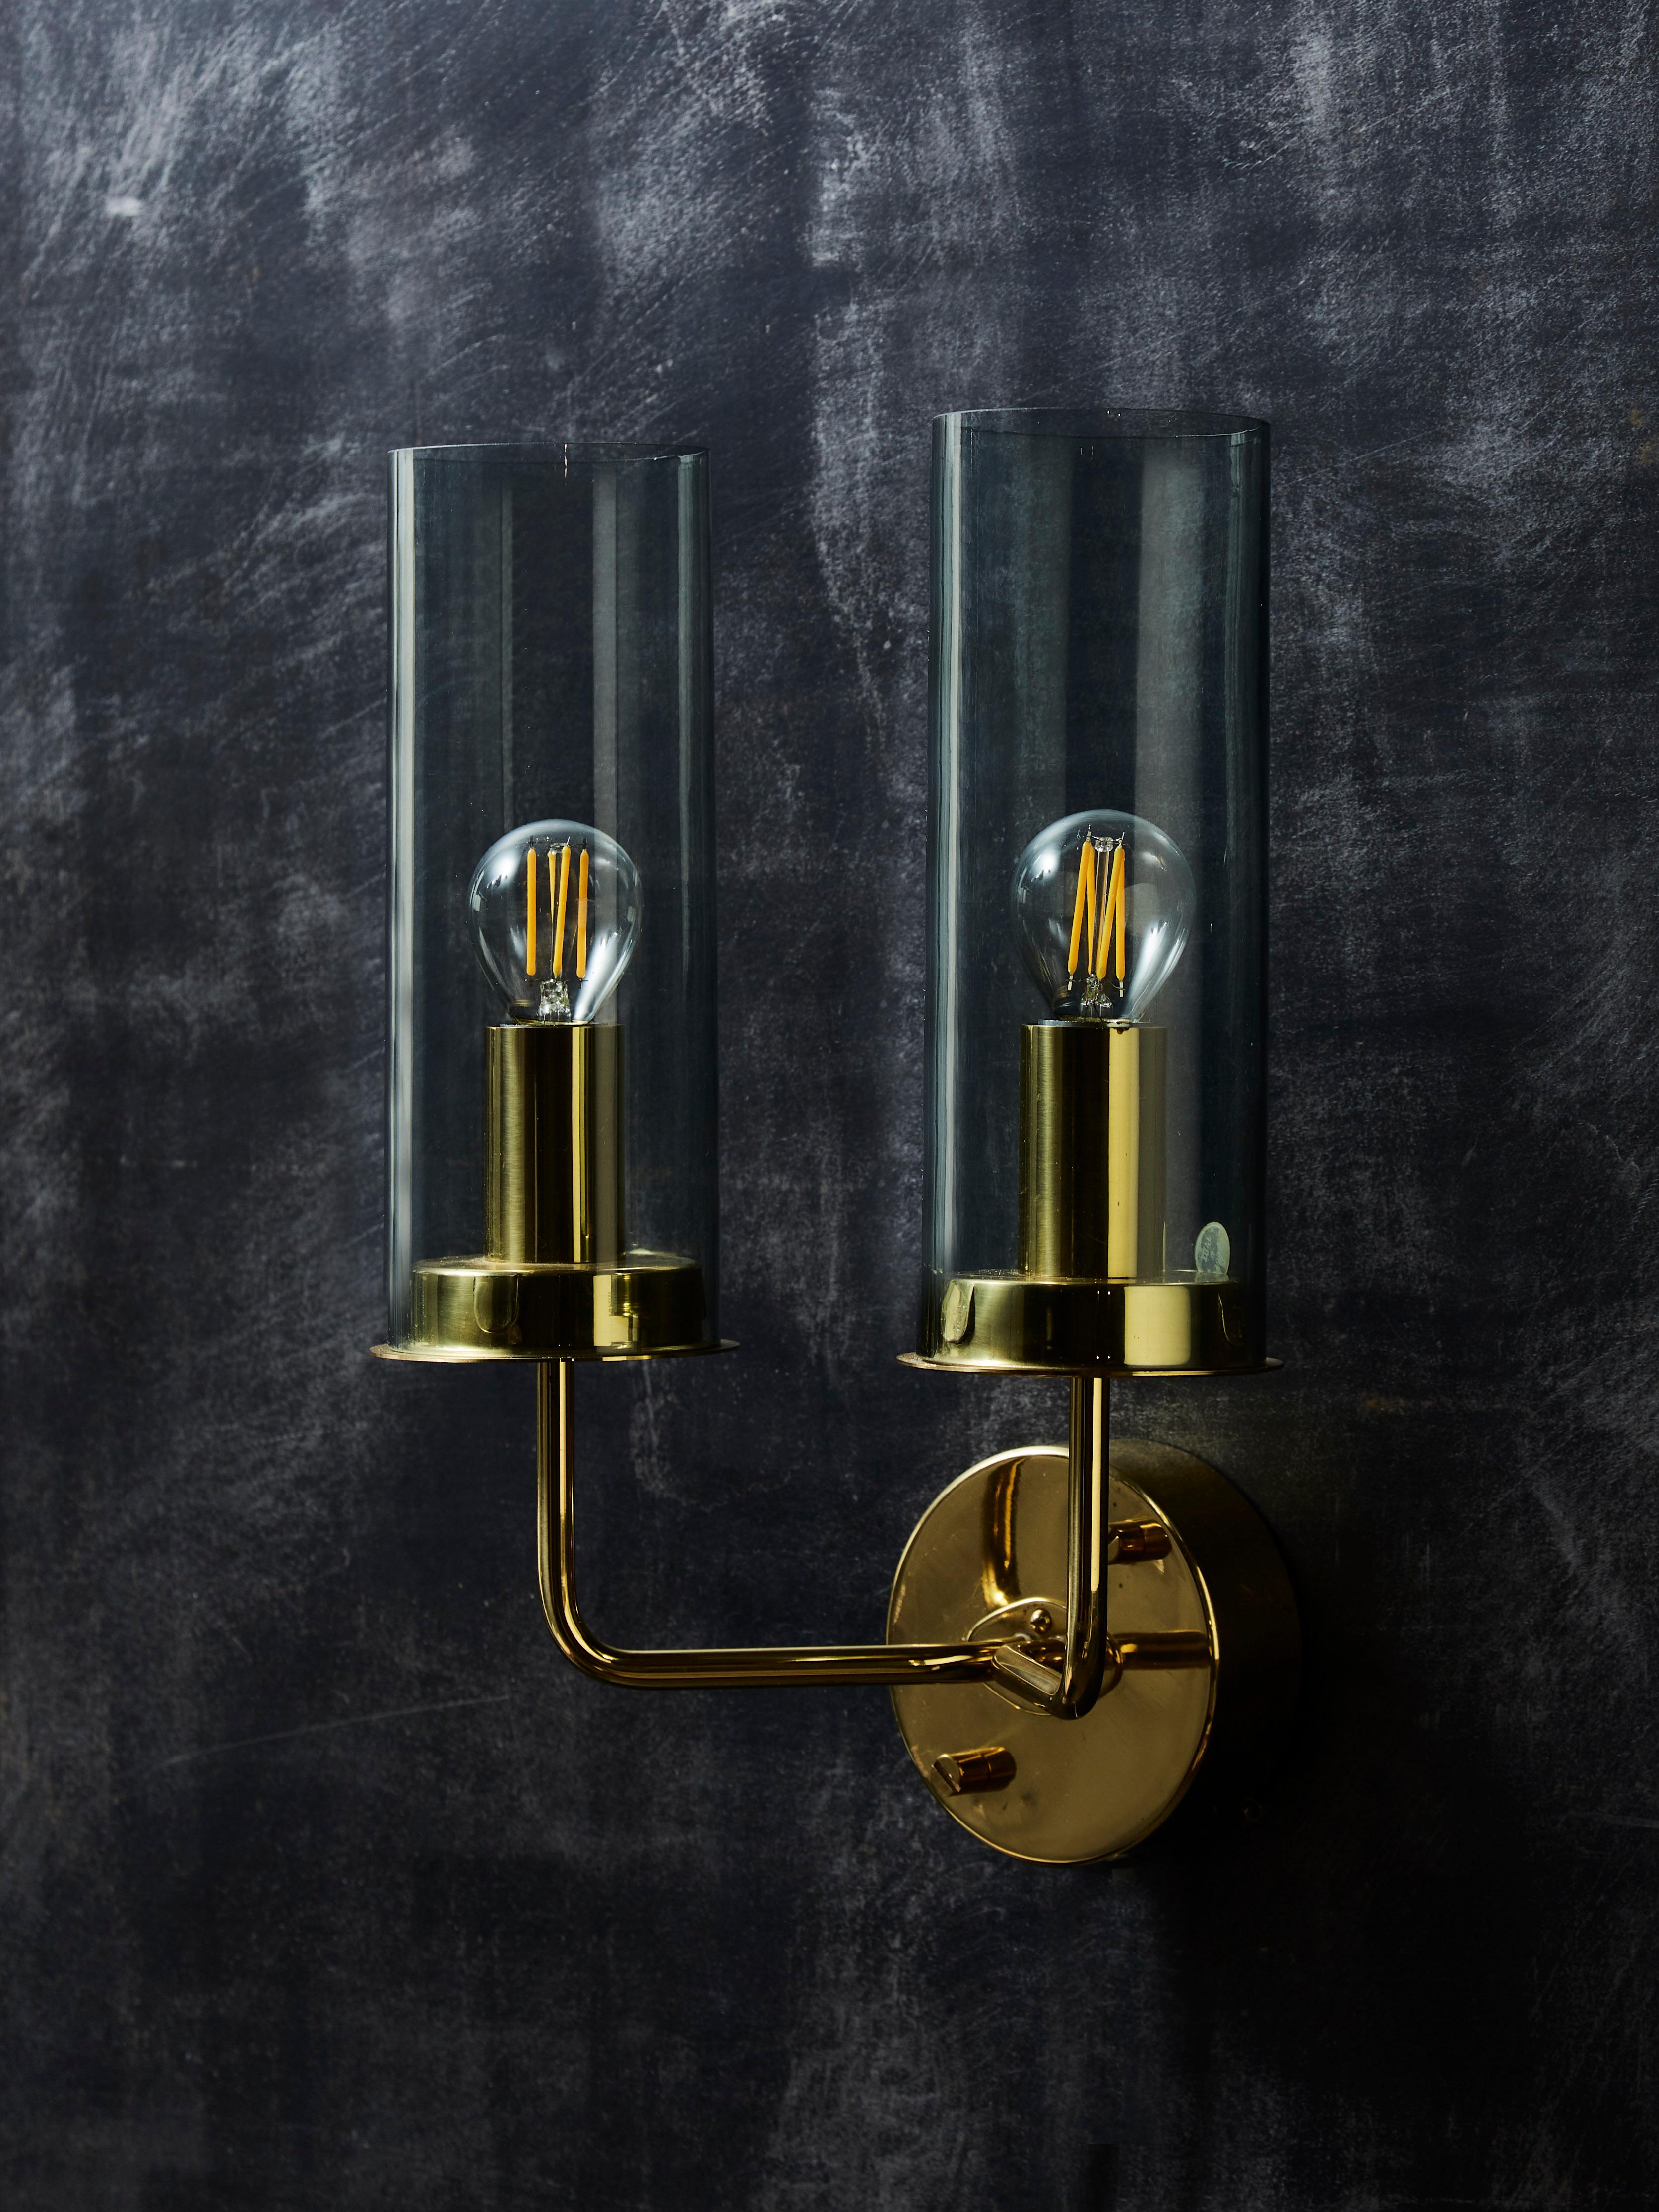 Pair of two lights Hans Agne Jakobsson wall sconces, made of brass structures and two lightly tinted glass shades.